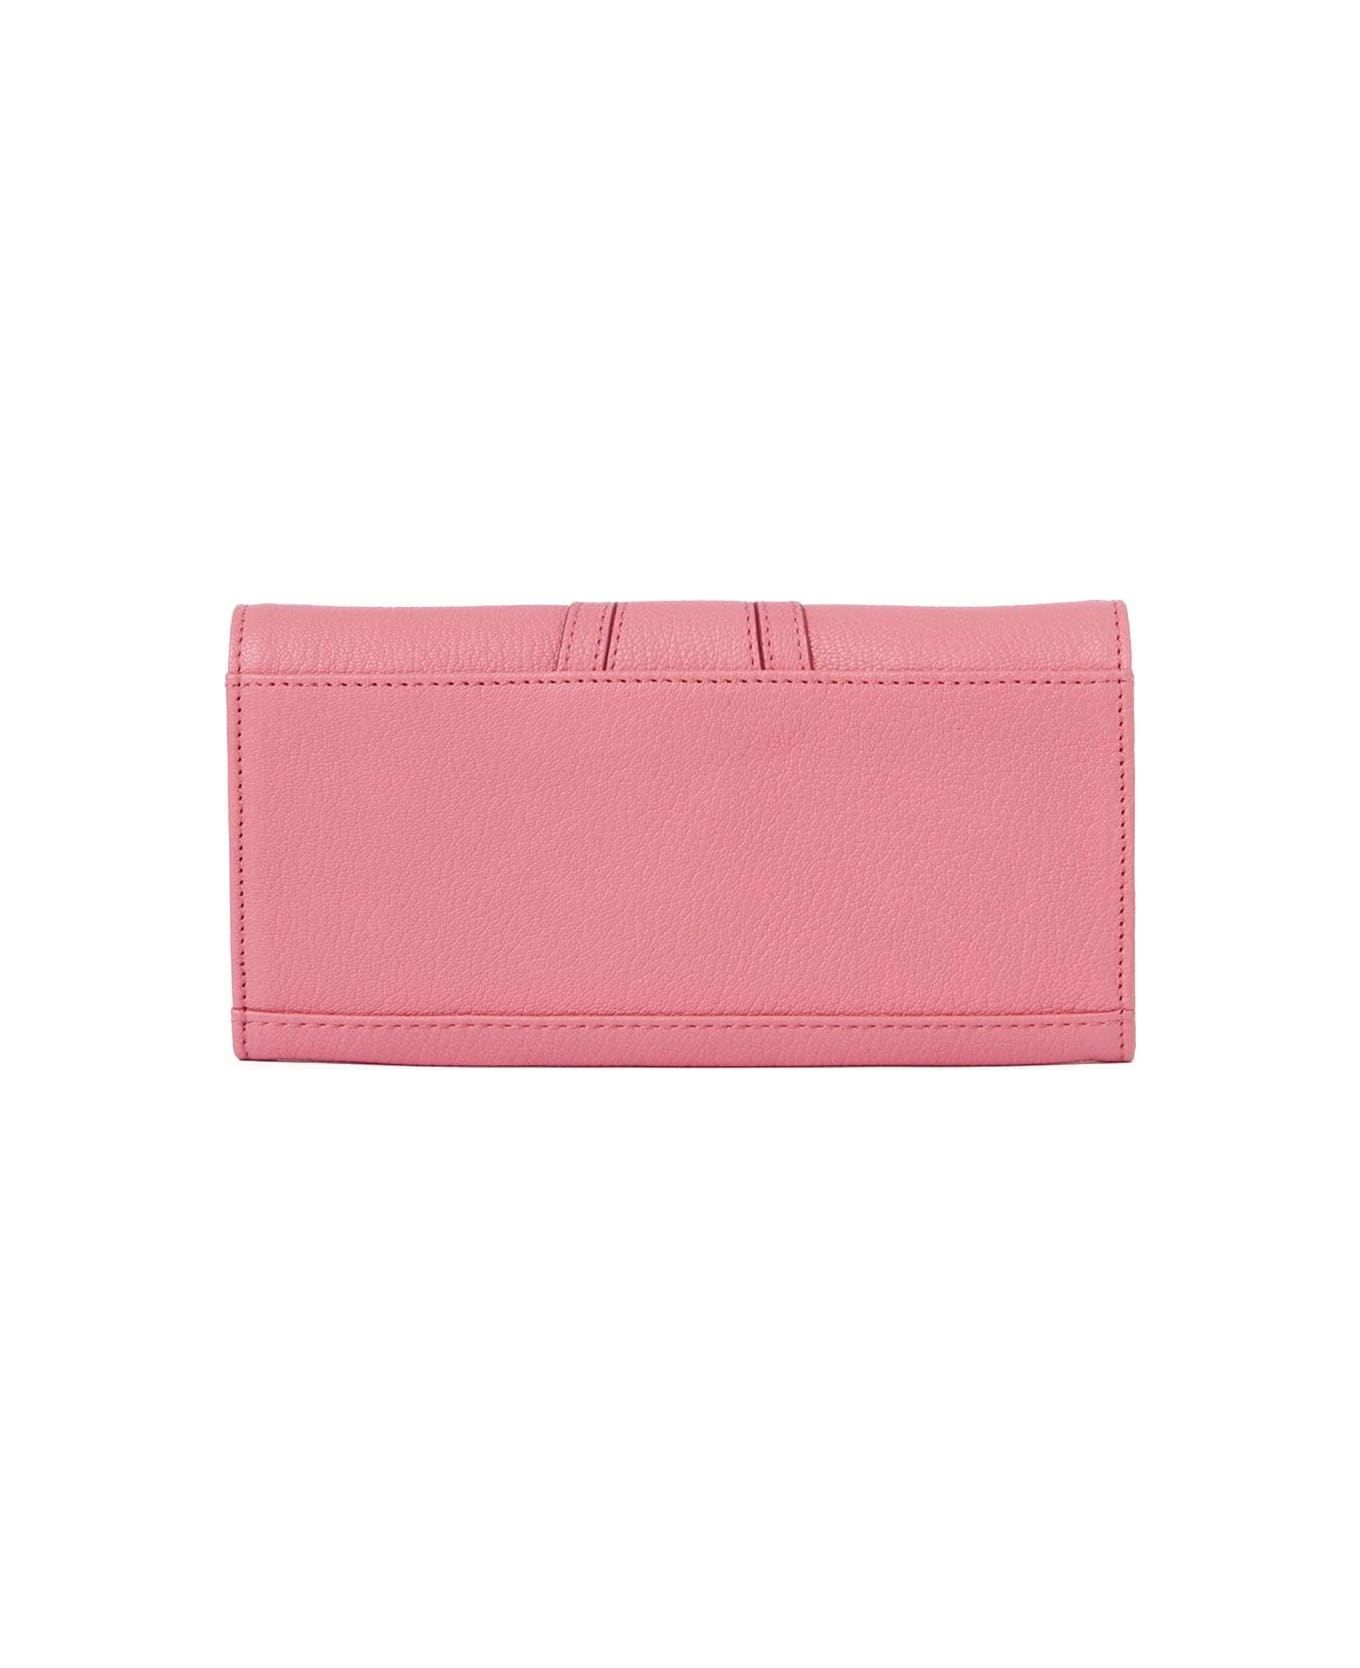 See by Chloé Wallet - PUSHY PINK